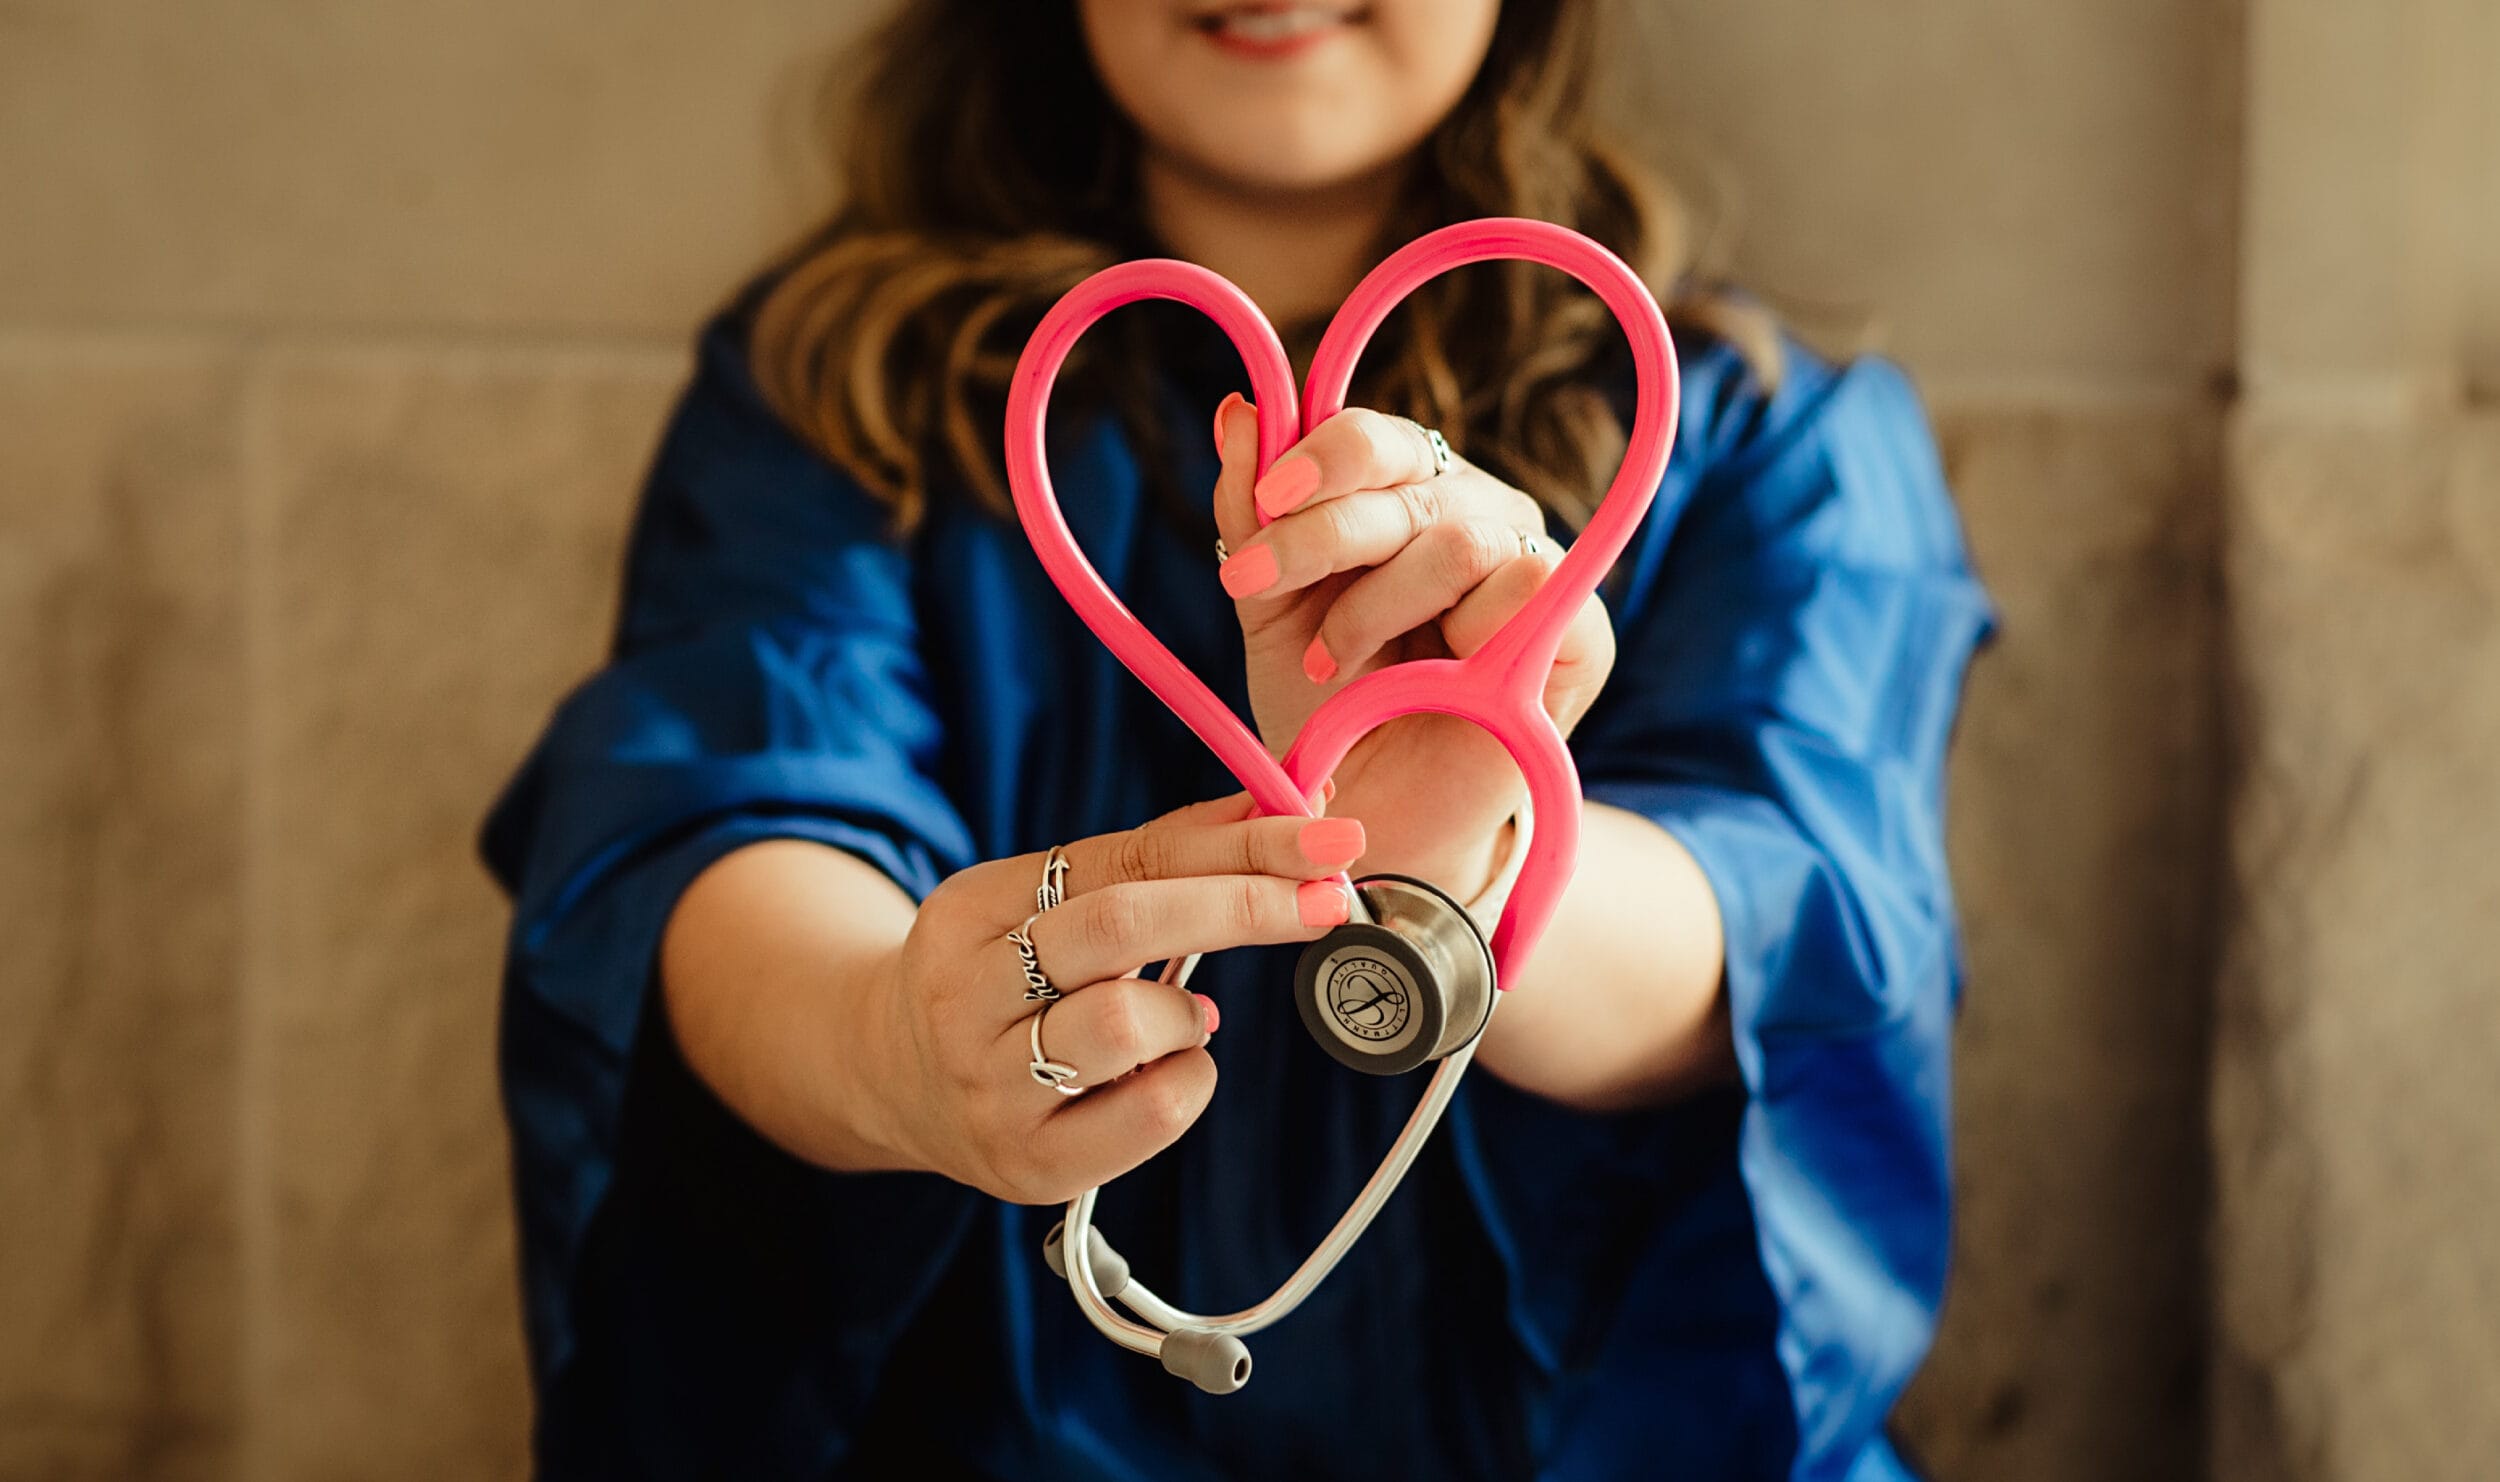 Nurse making heart with doctor tool